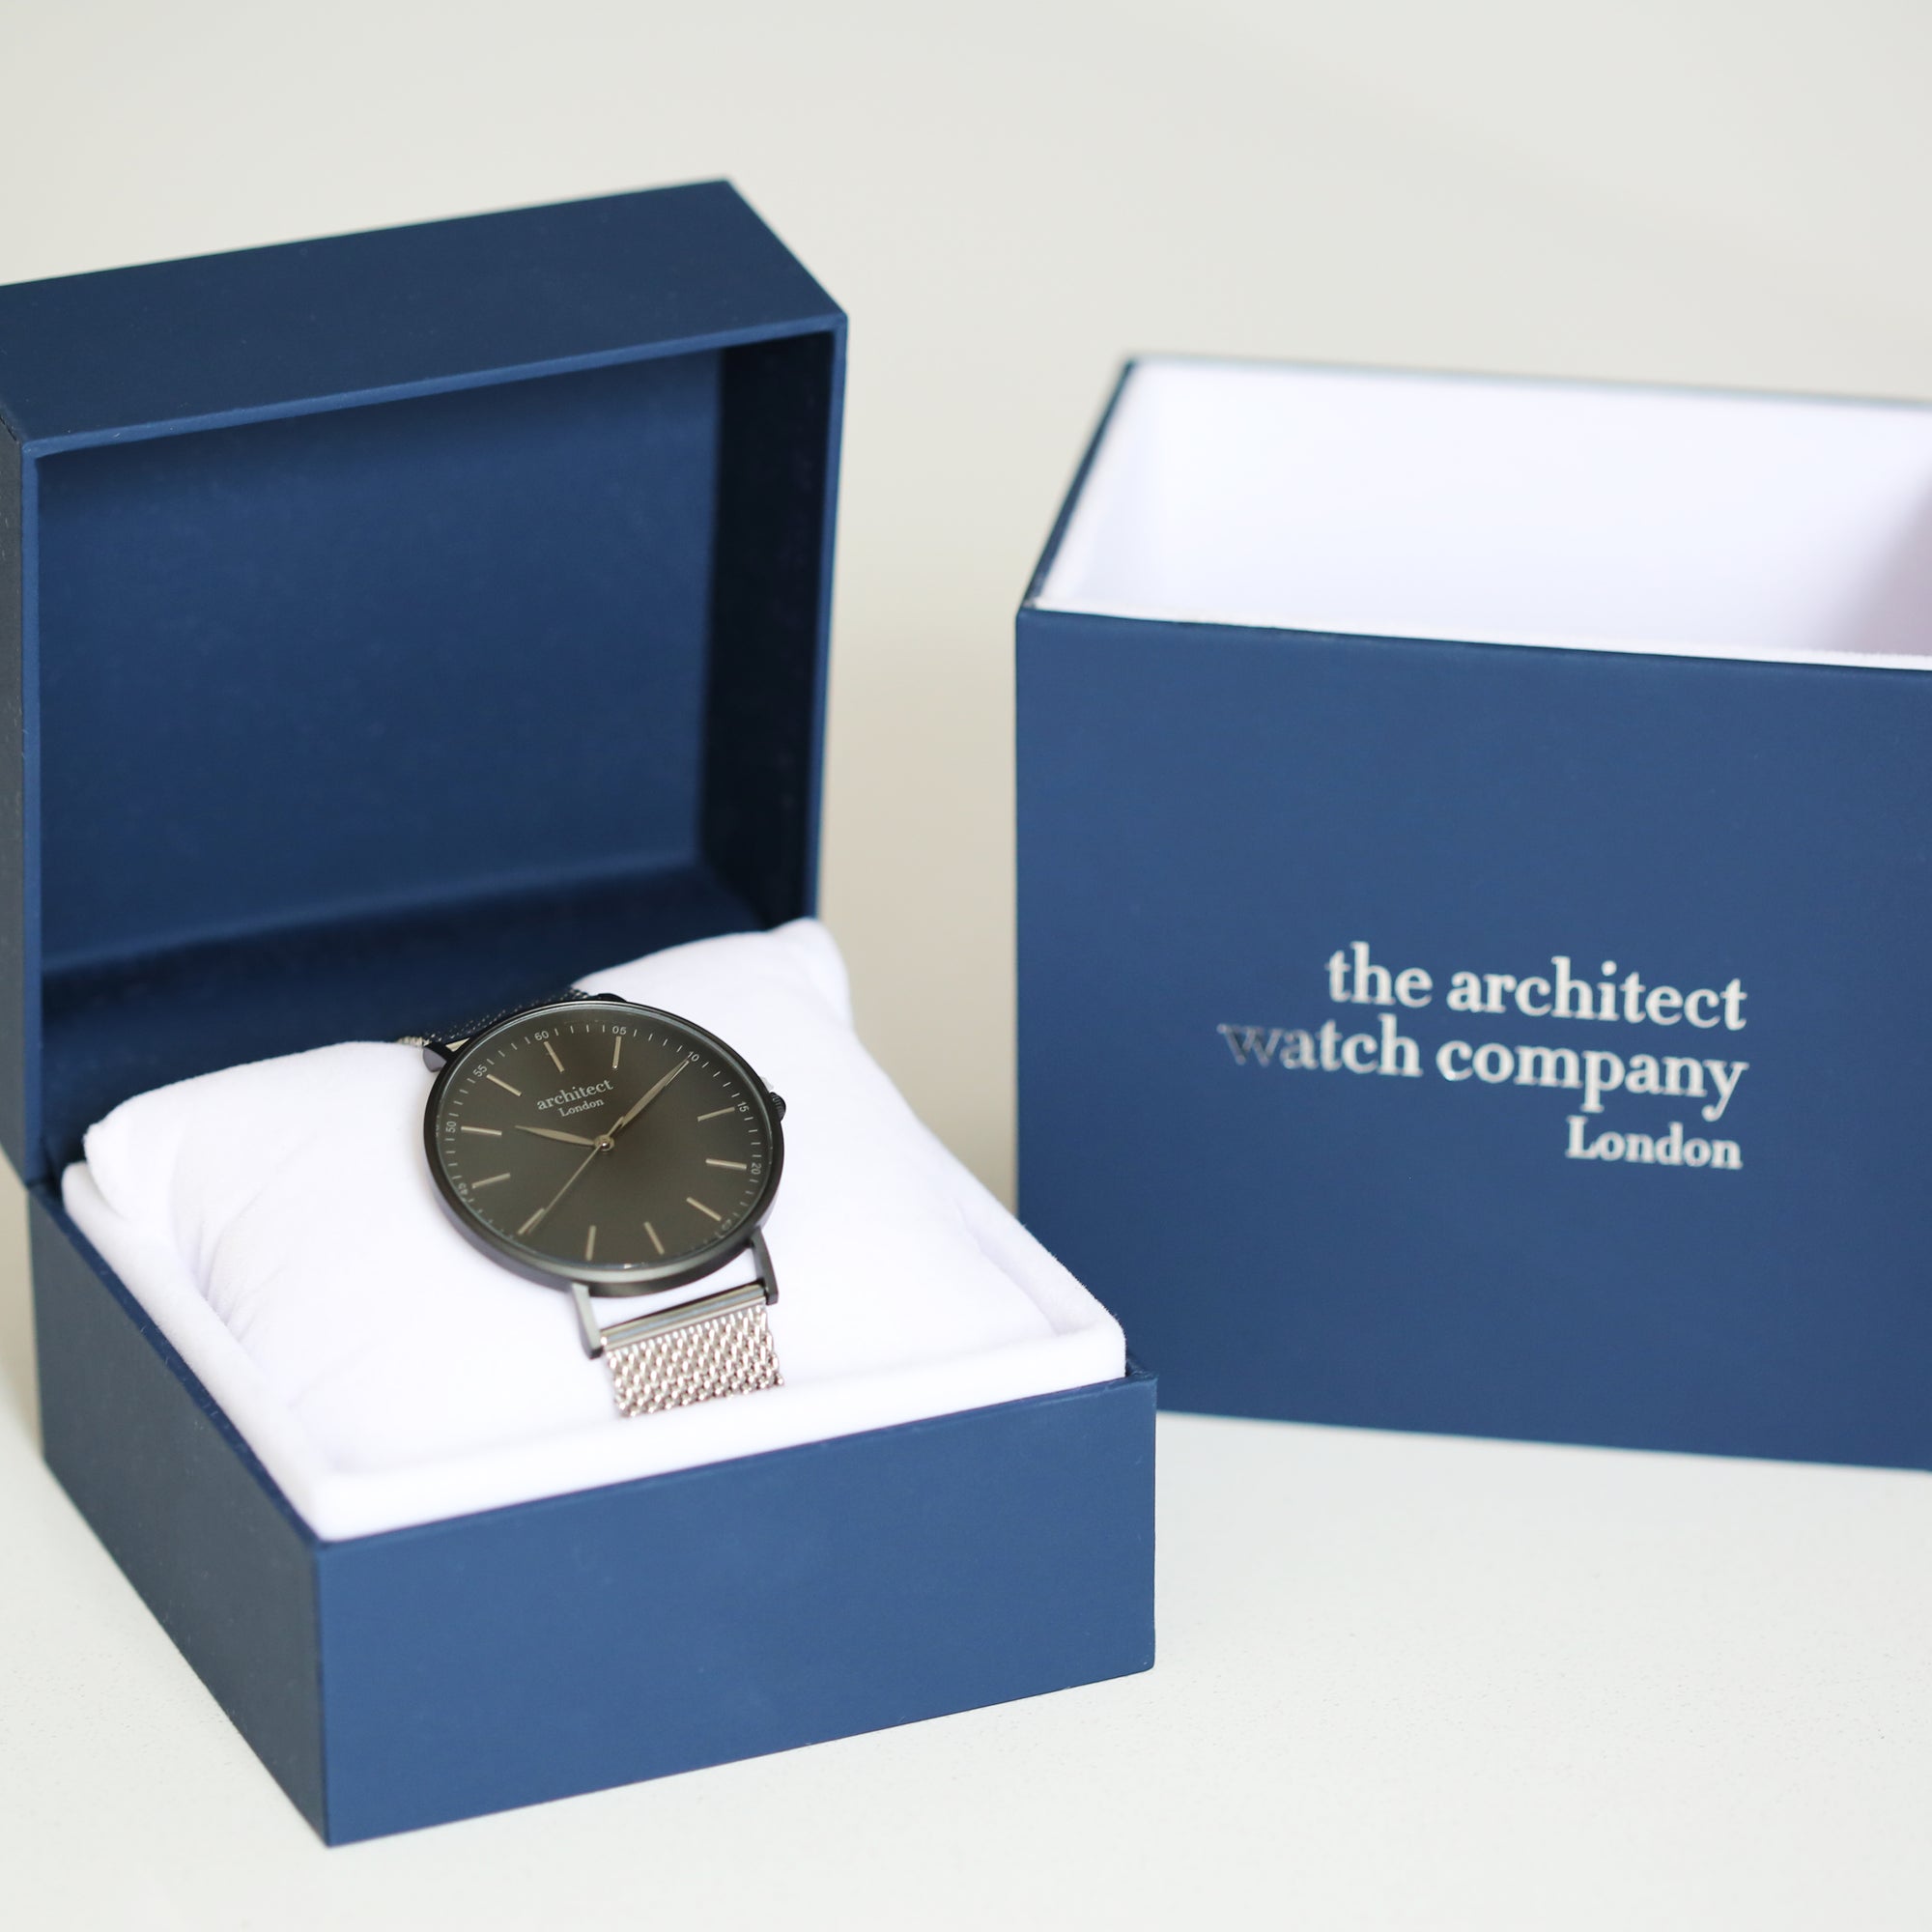 Image of a man's watch in a blue presentation box. The watch can be engraved on the back with your own handwriting. The watch is made by The Architect Watch Company London and has a large black face and a stainless steel mesh strap. The rear of the watch can be engraved with your message written in your own handwriting.